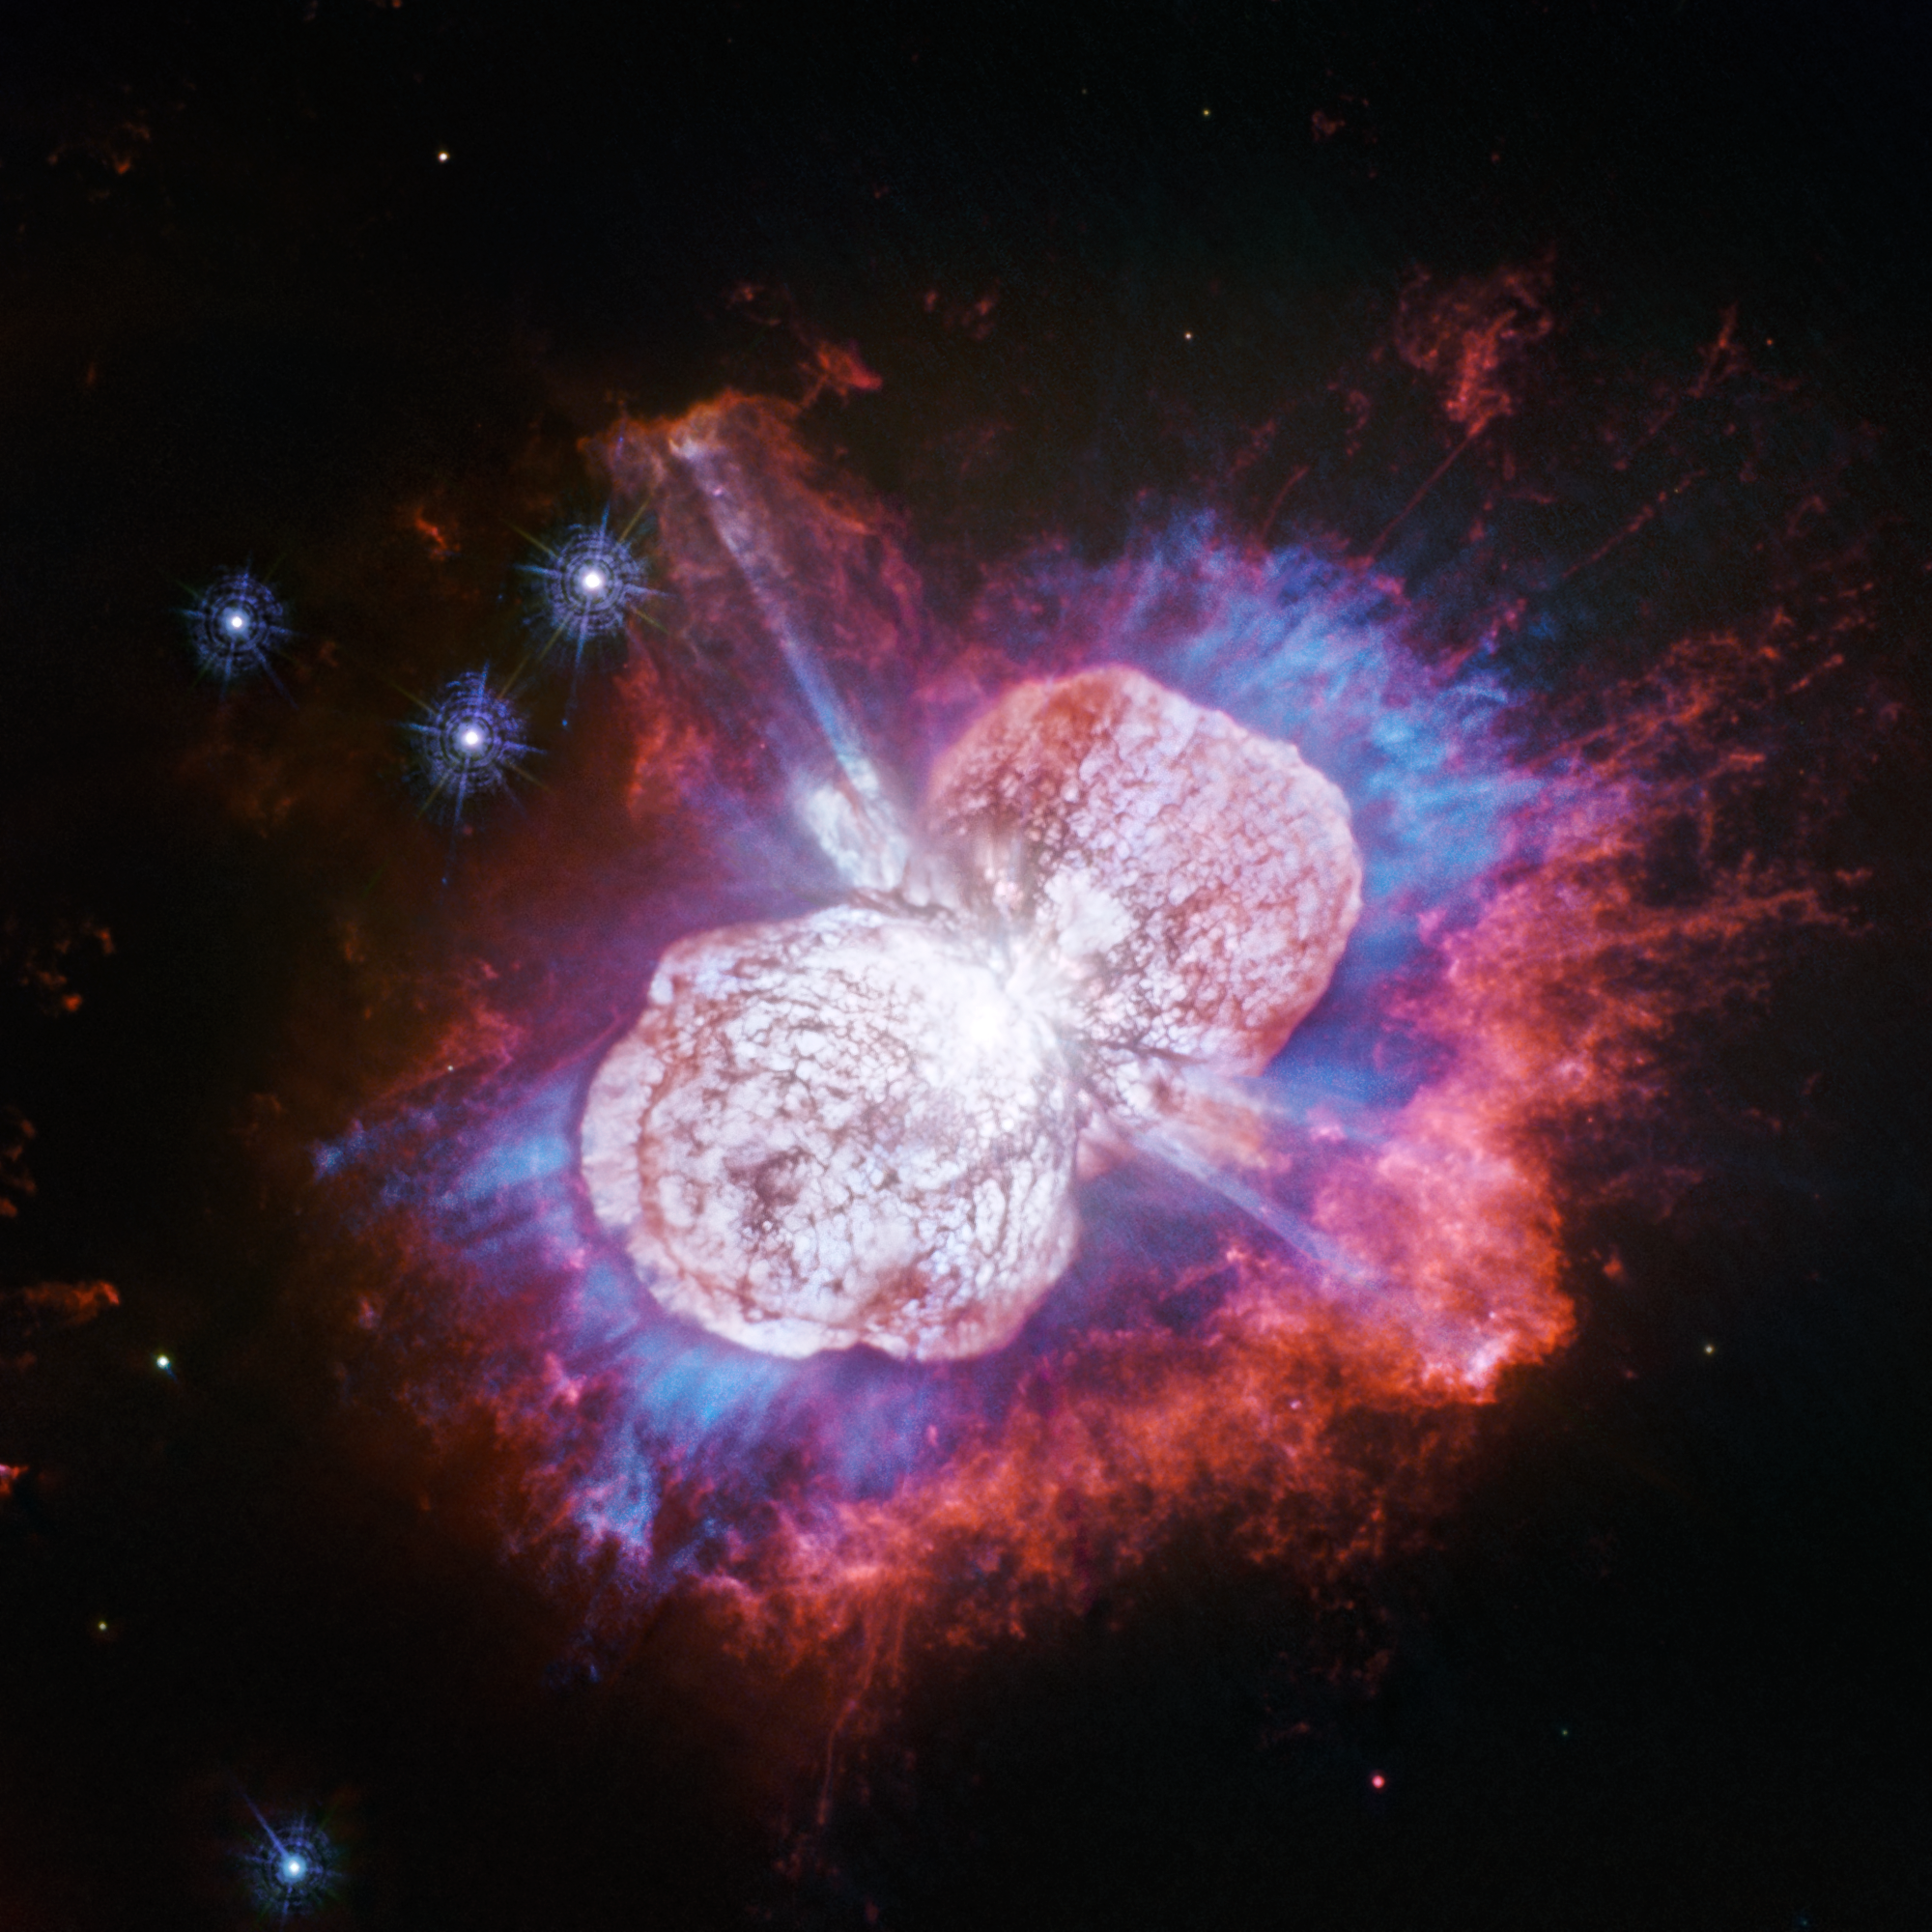 this image shows two hubble space telescope images